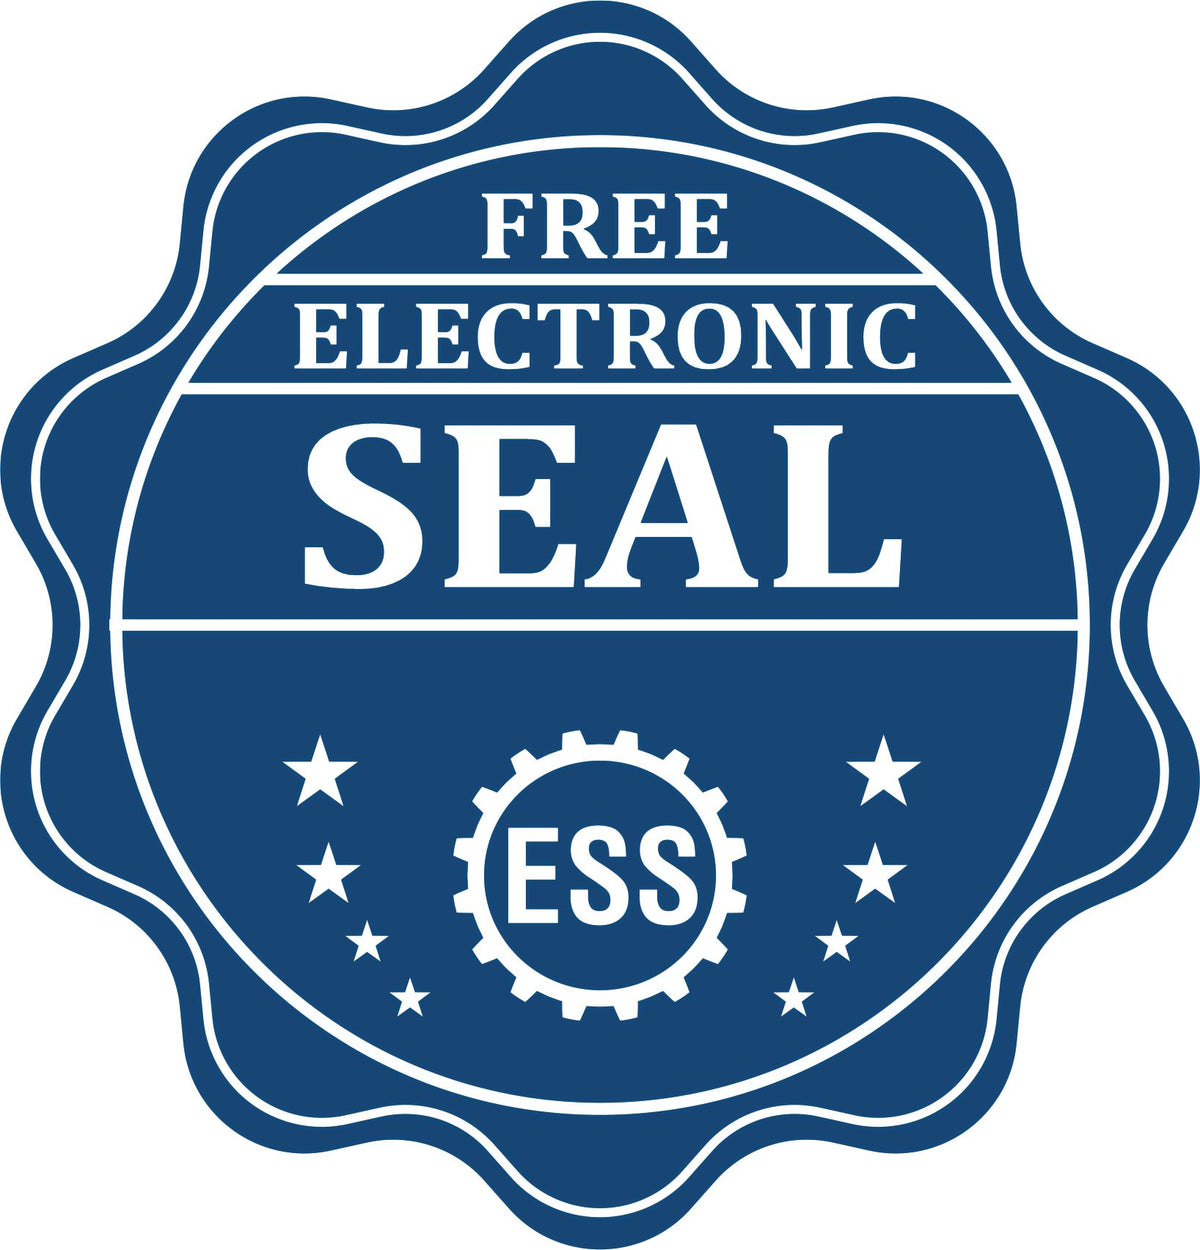 A badge showing a free electronic seal for the Pennsylvania Geologist Desk Seal with stars and the ESS gear on the emblem.